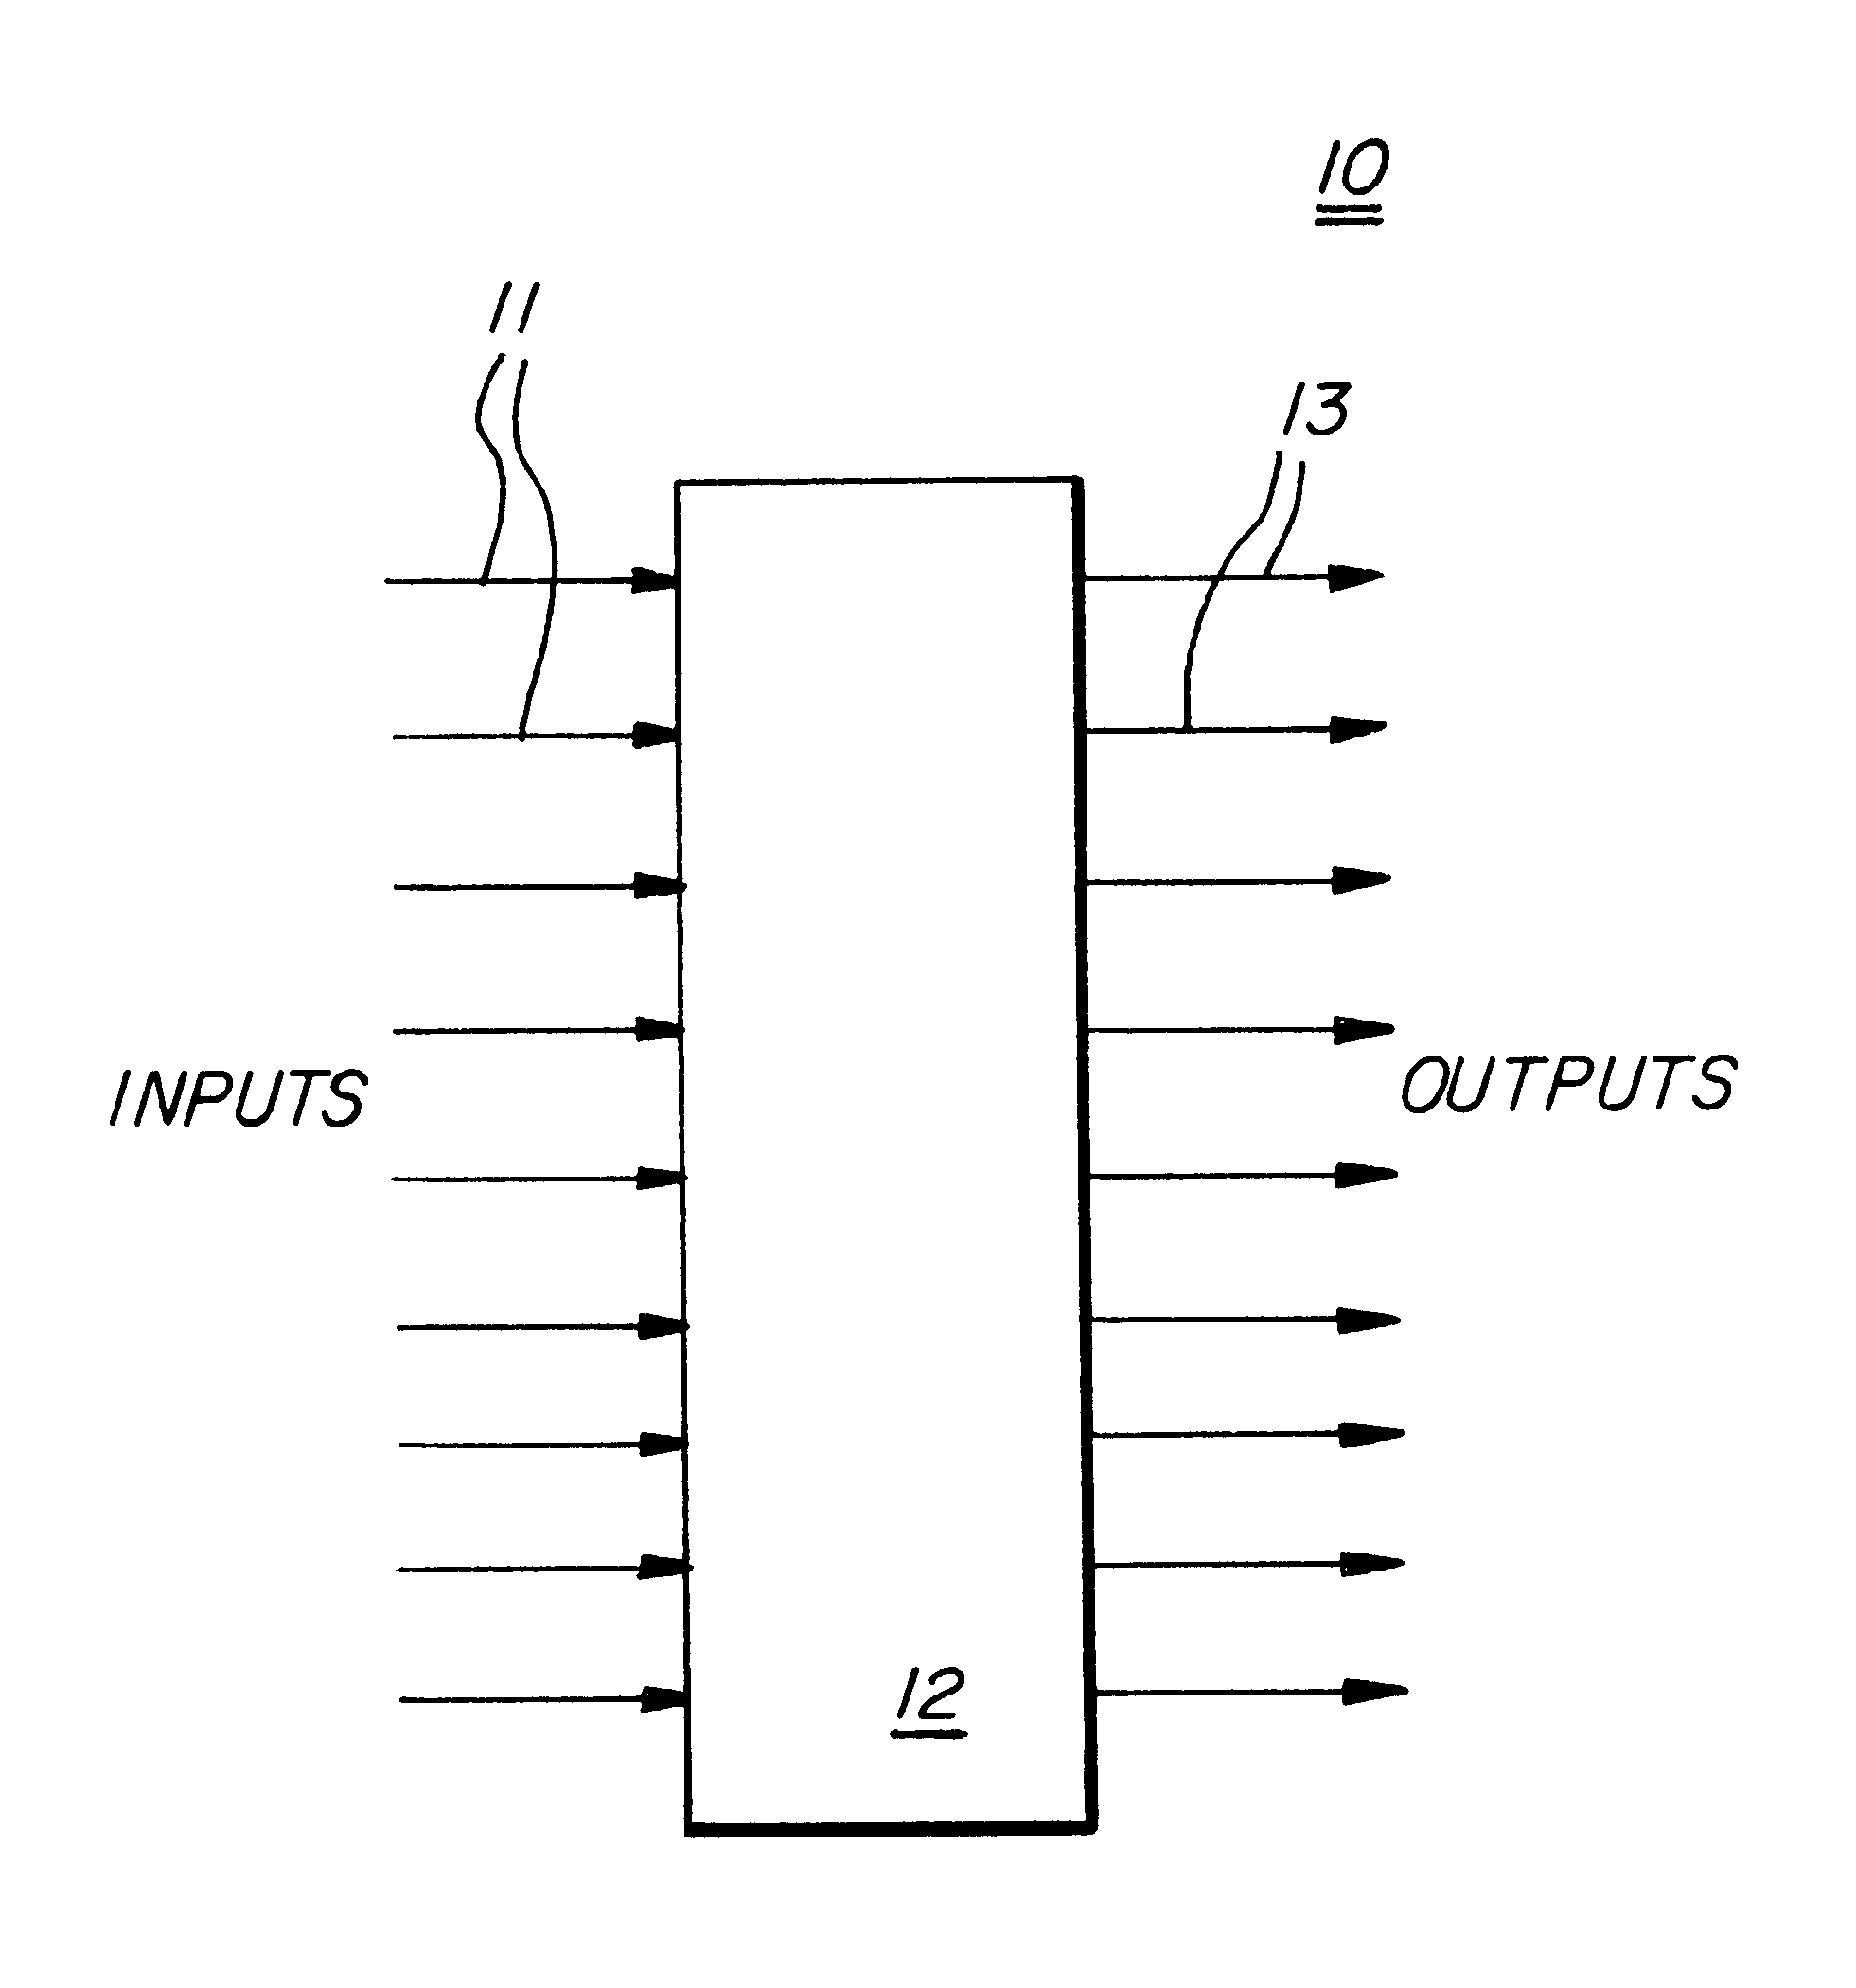 High speed multi-stage switching network formed from stacked switching layers